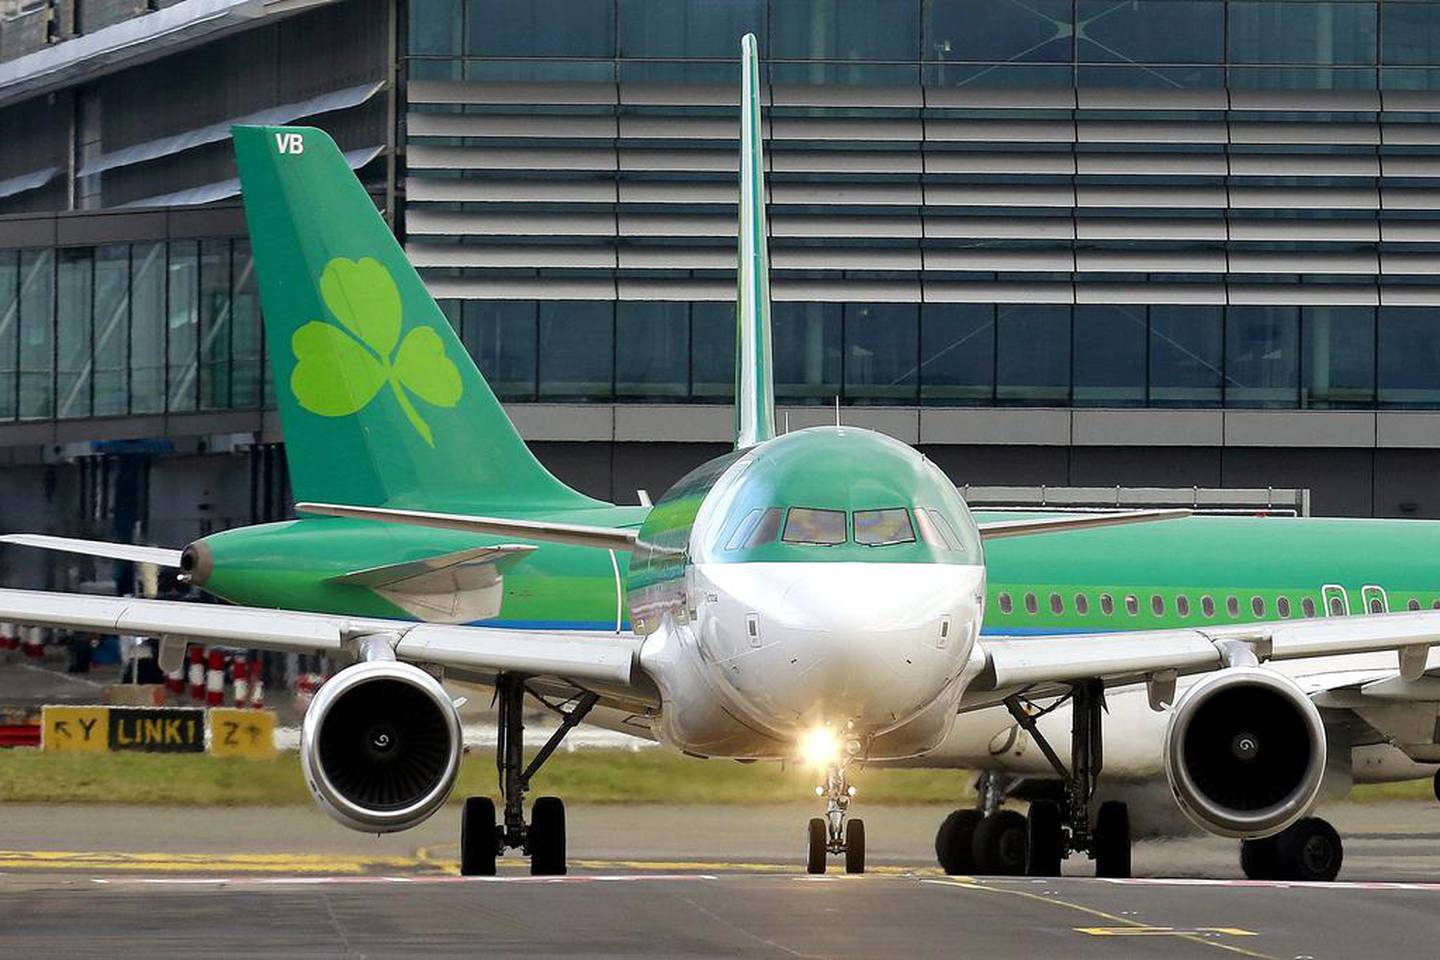 Ireland's Aer Lingus had the shortest flight delay times in the UK last year. Reuters